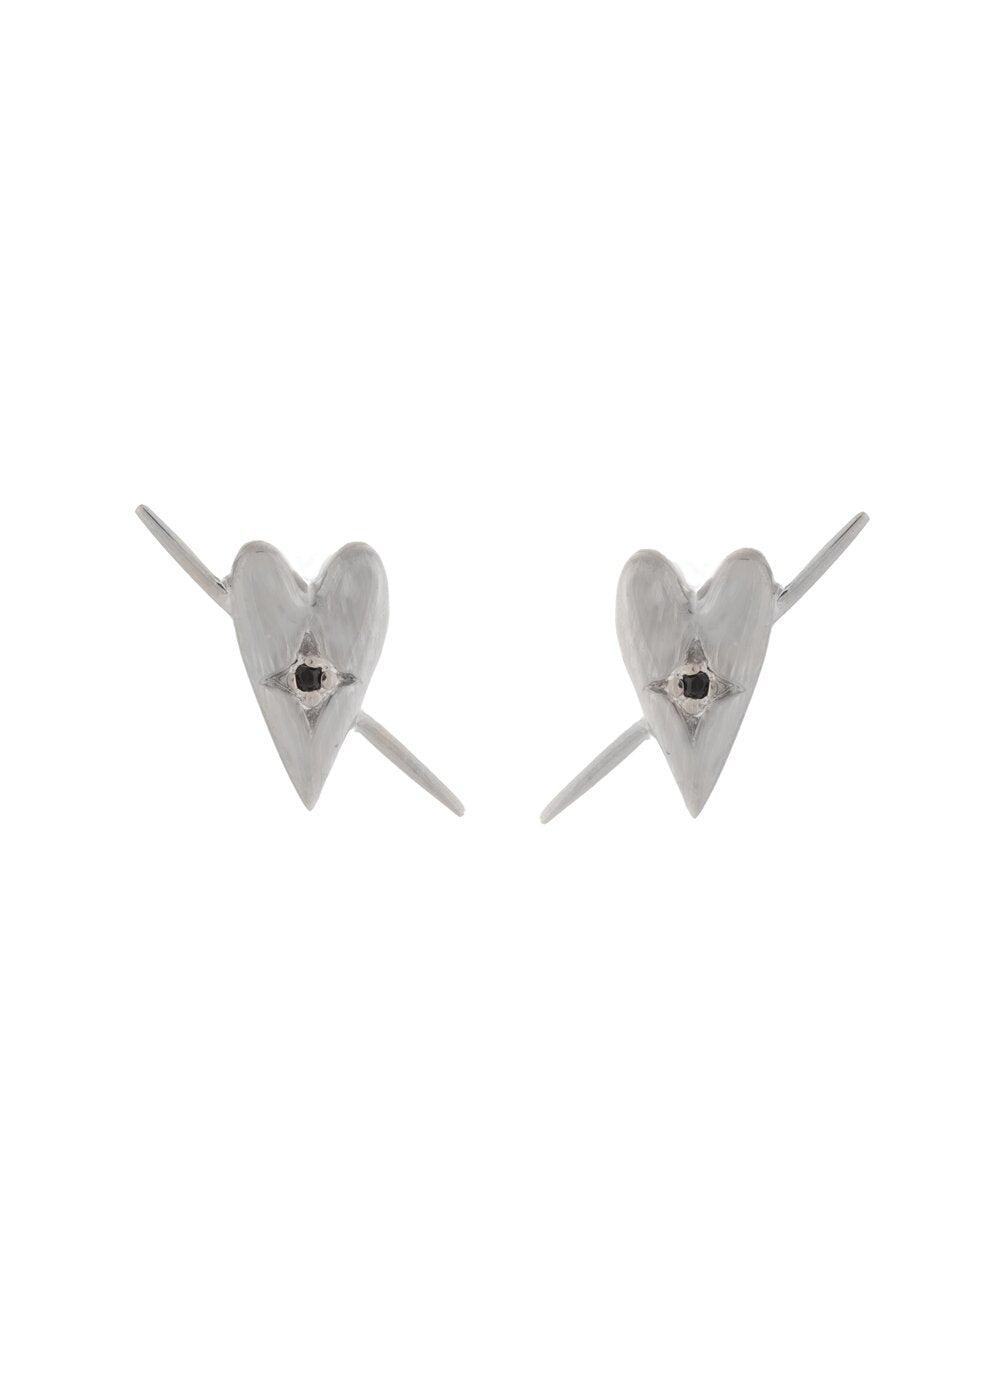 UNIKONCEPT Lifestyle boutique: image shows the Celeste Studs in silver onyx by Sarah Mulder. These heart shaped studs feature a small onyx stone in the centre